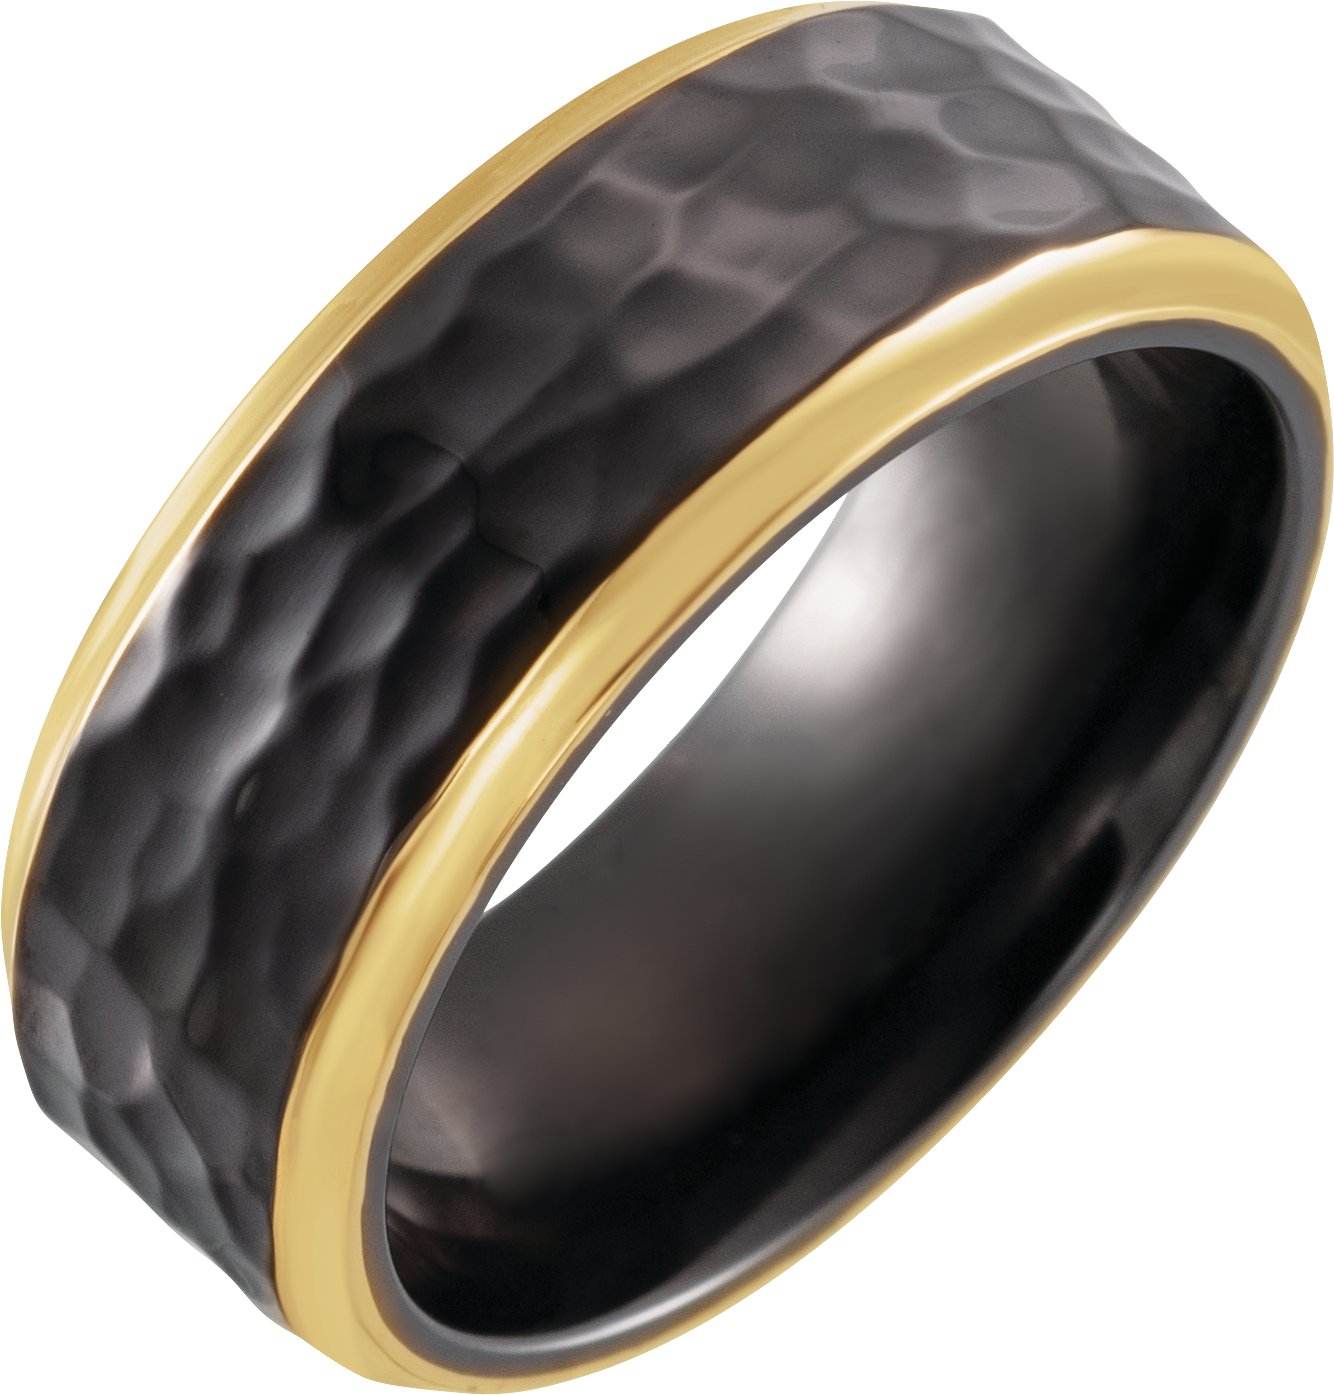 18K Yellow Gold PVD Black Titanium 8 mm Flat Size 13 Band with Hammer Finish